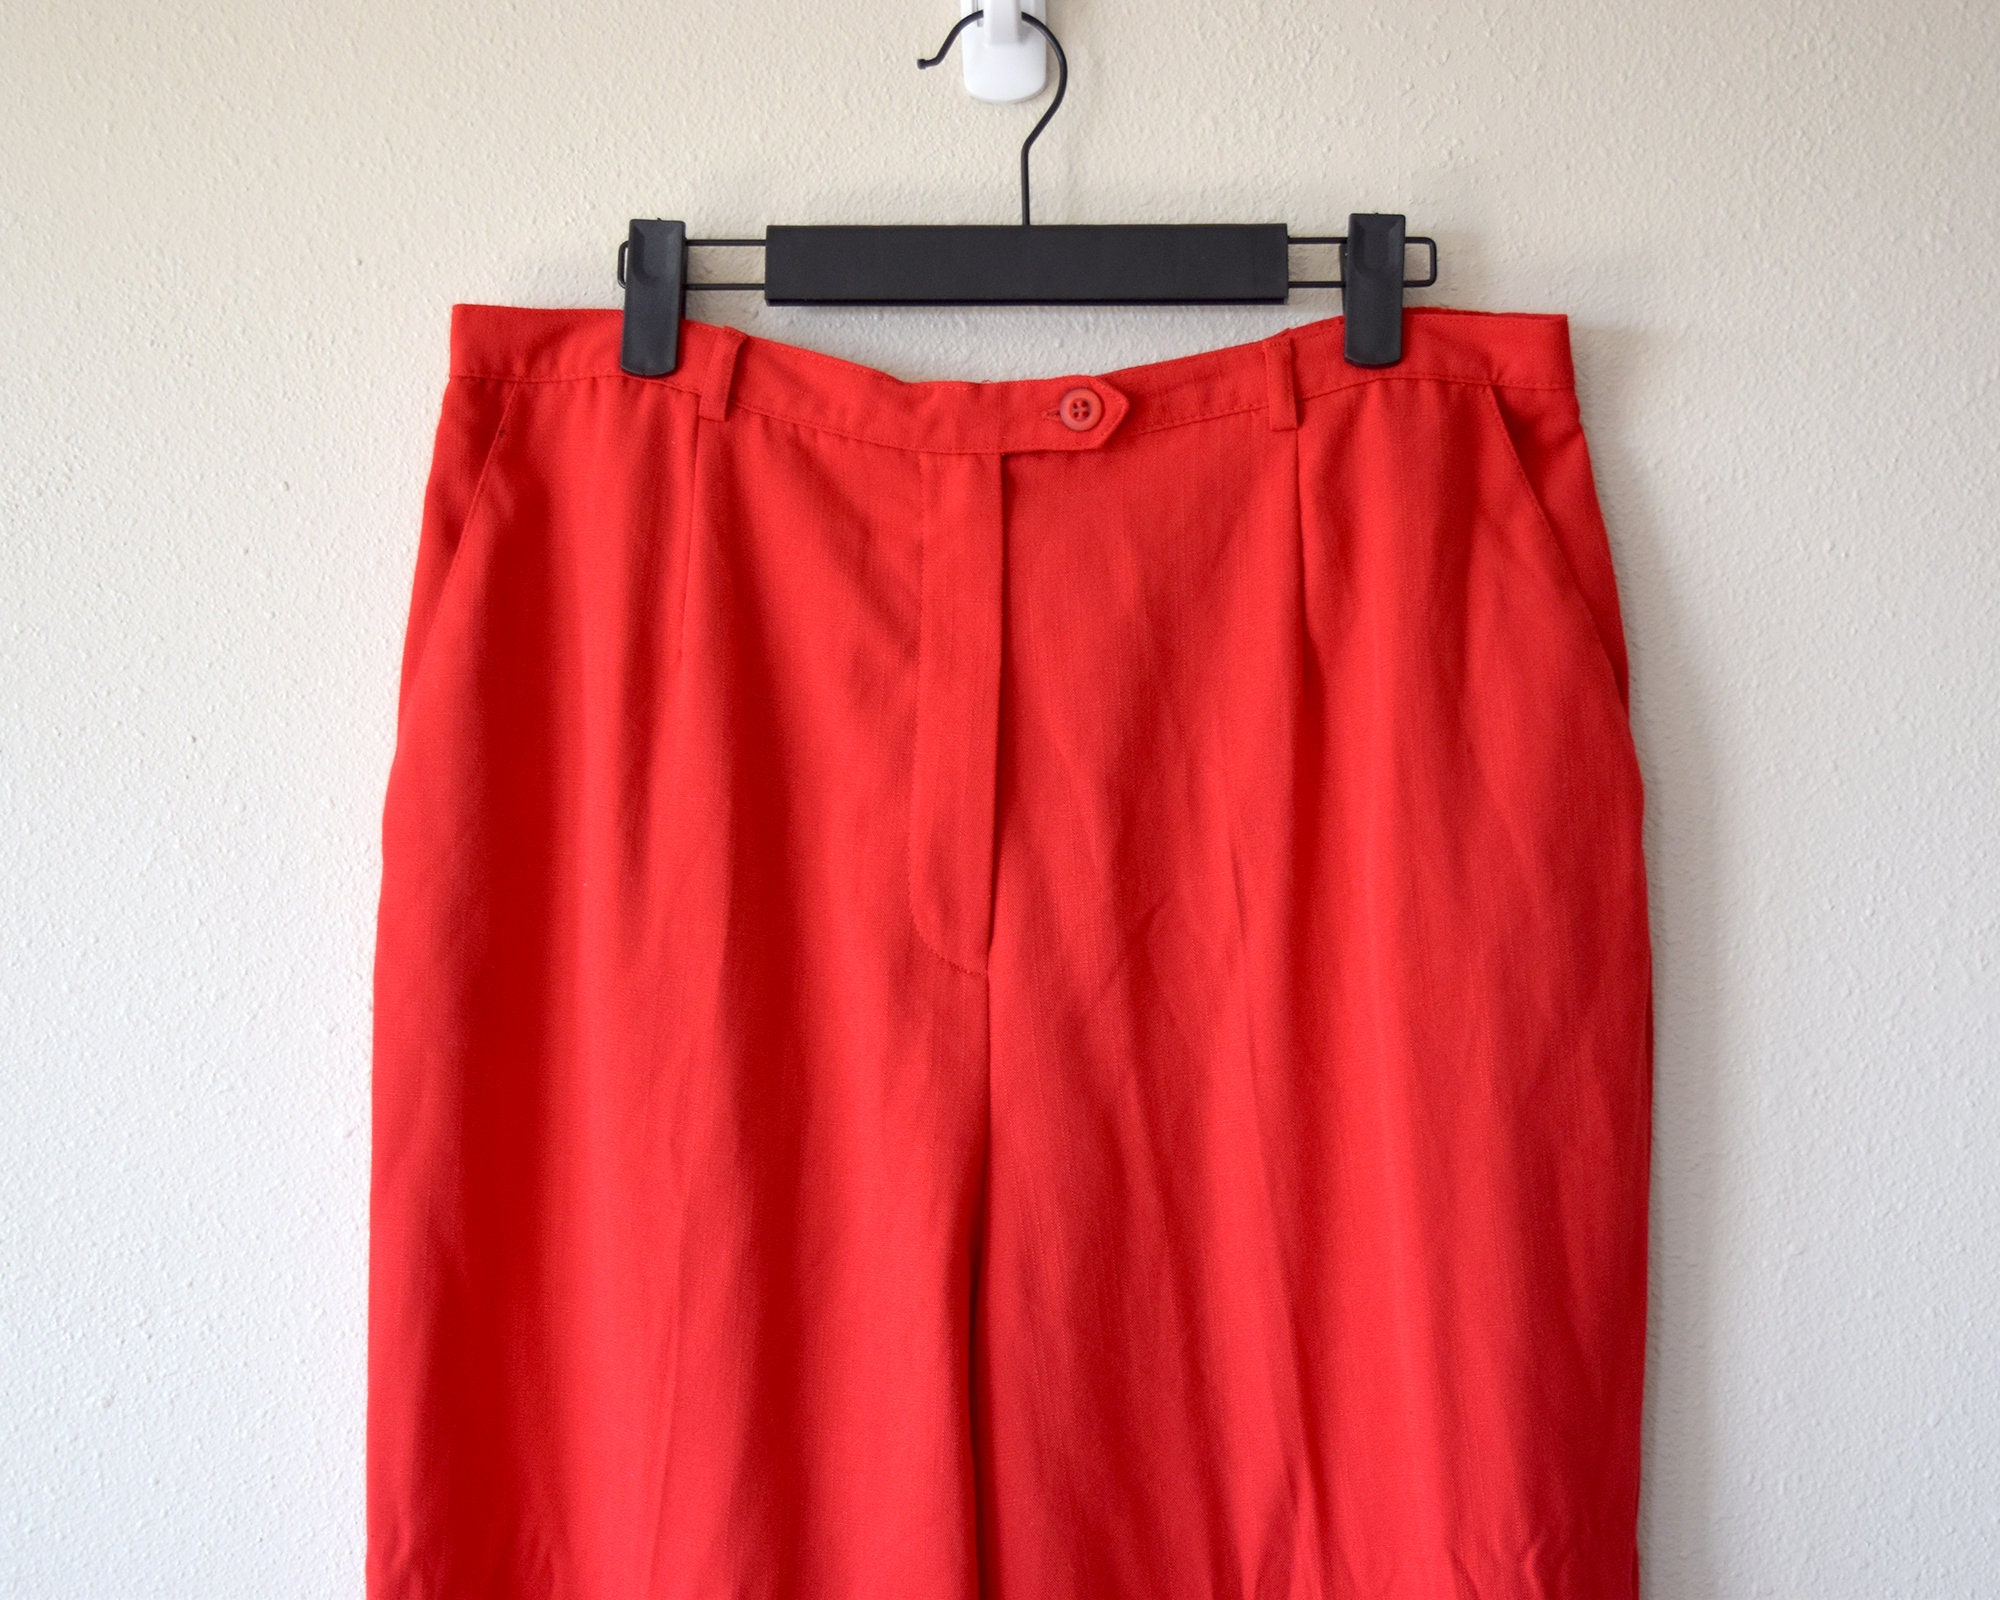 Vintage Wide Leg Pants Bright Red Trousers Size 16 | Etsy